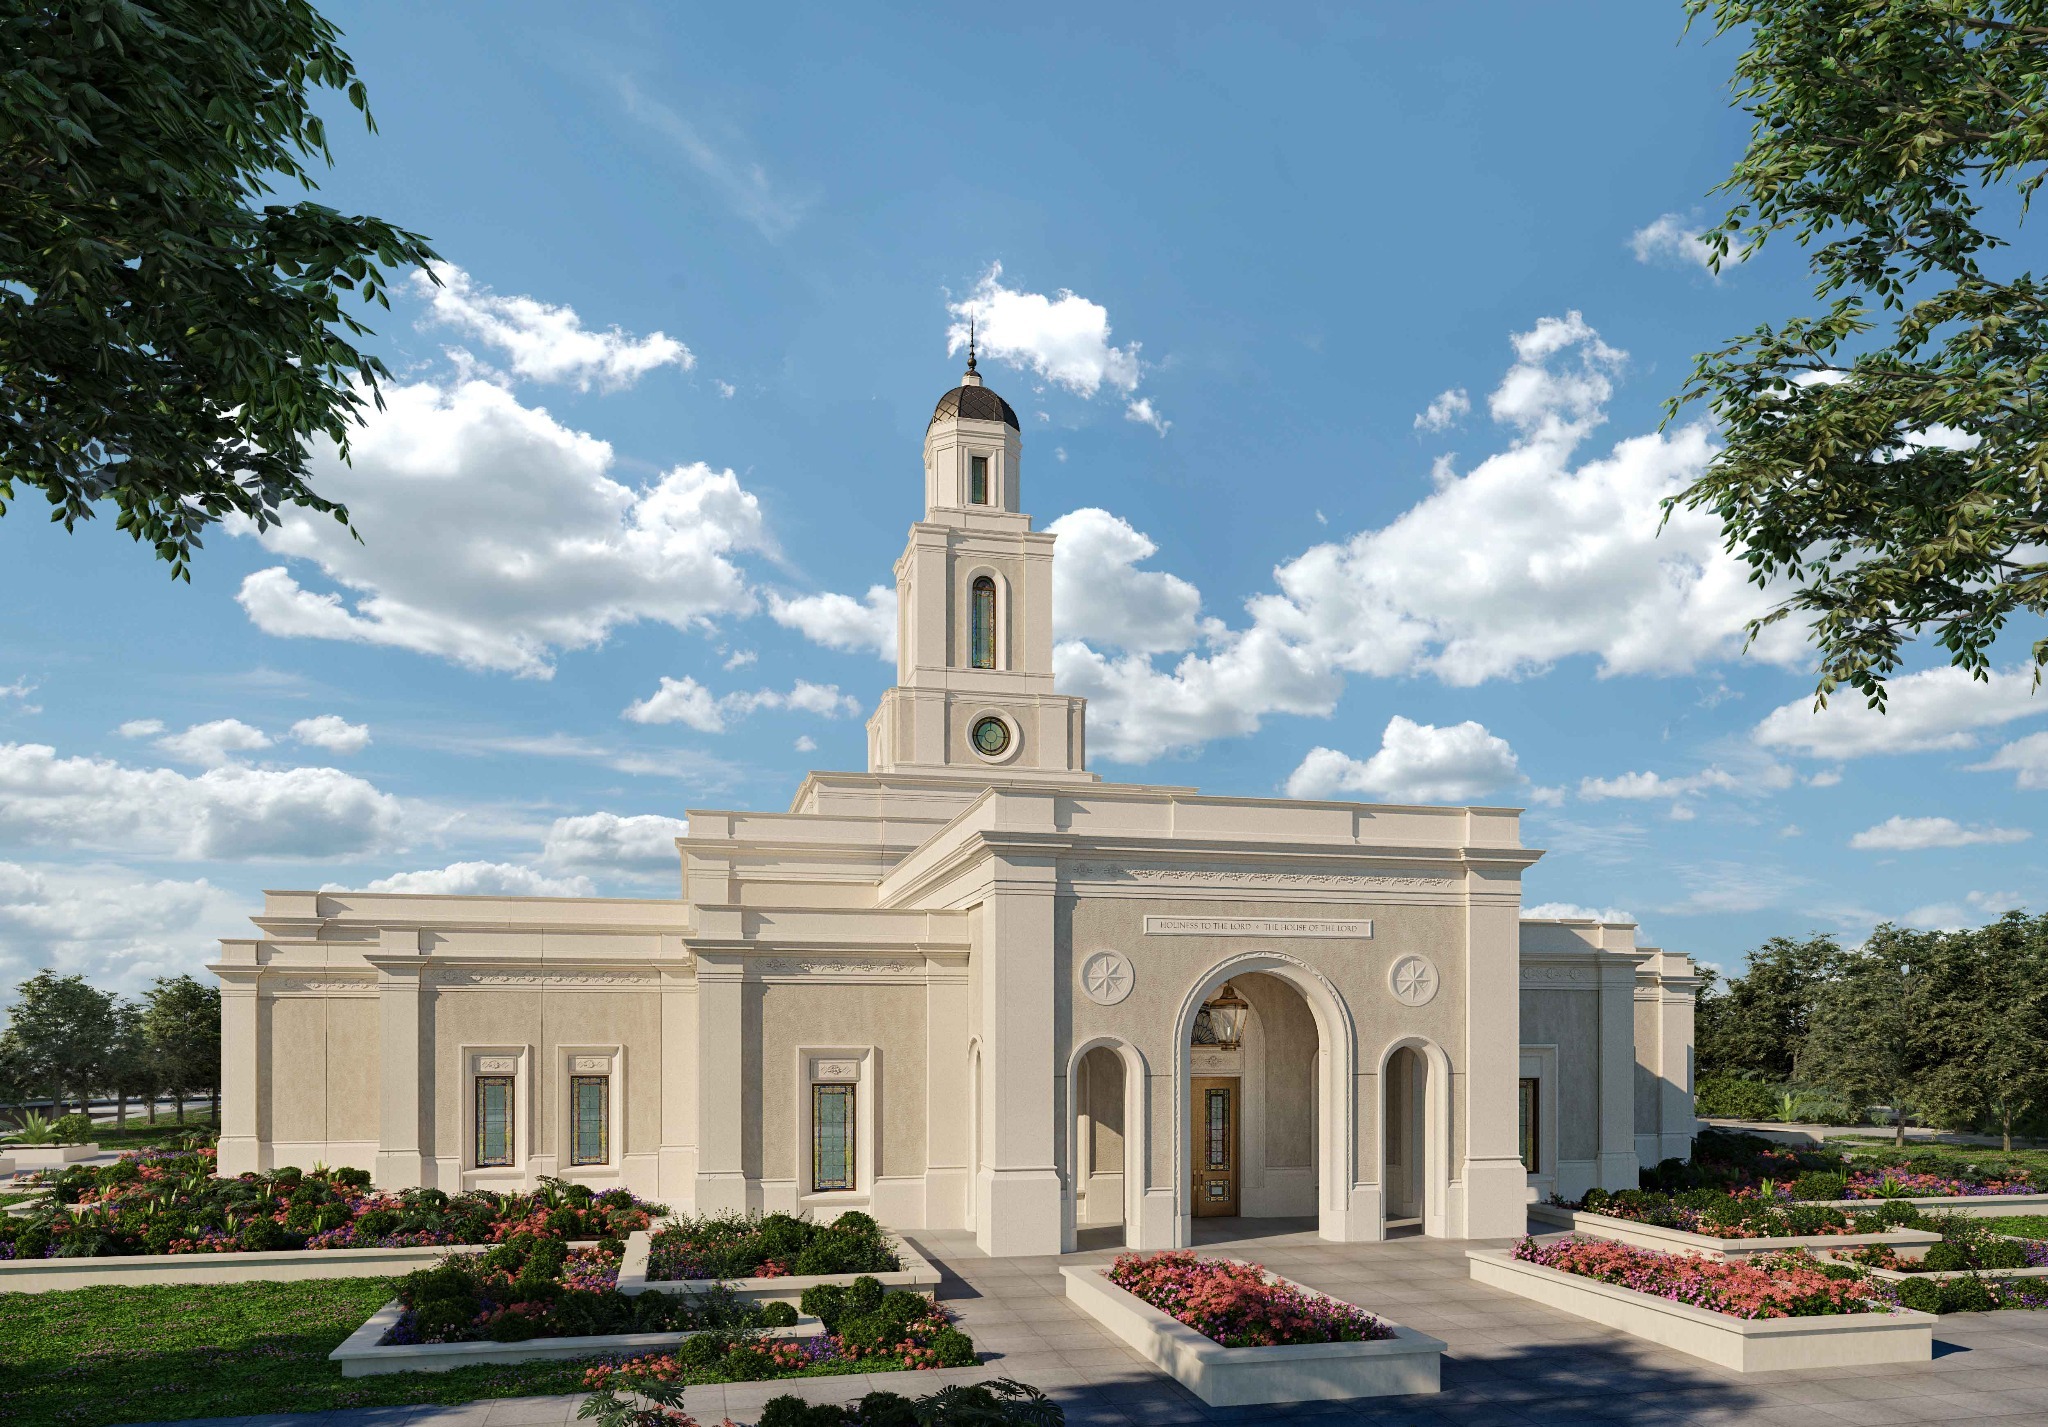 The first rendering of the Bentonville Arkansas temple of the Church of Jesus Christ of Latter-day Saints